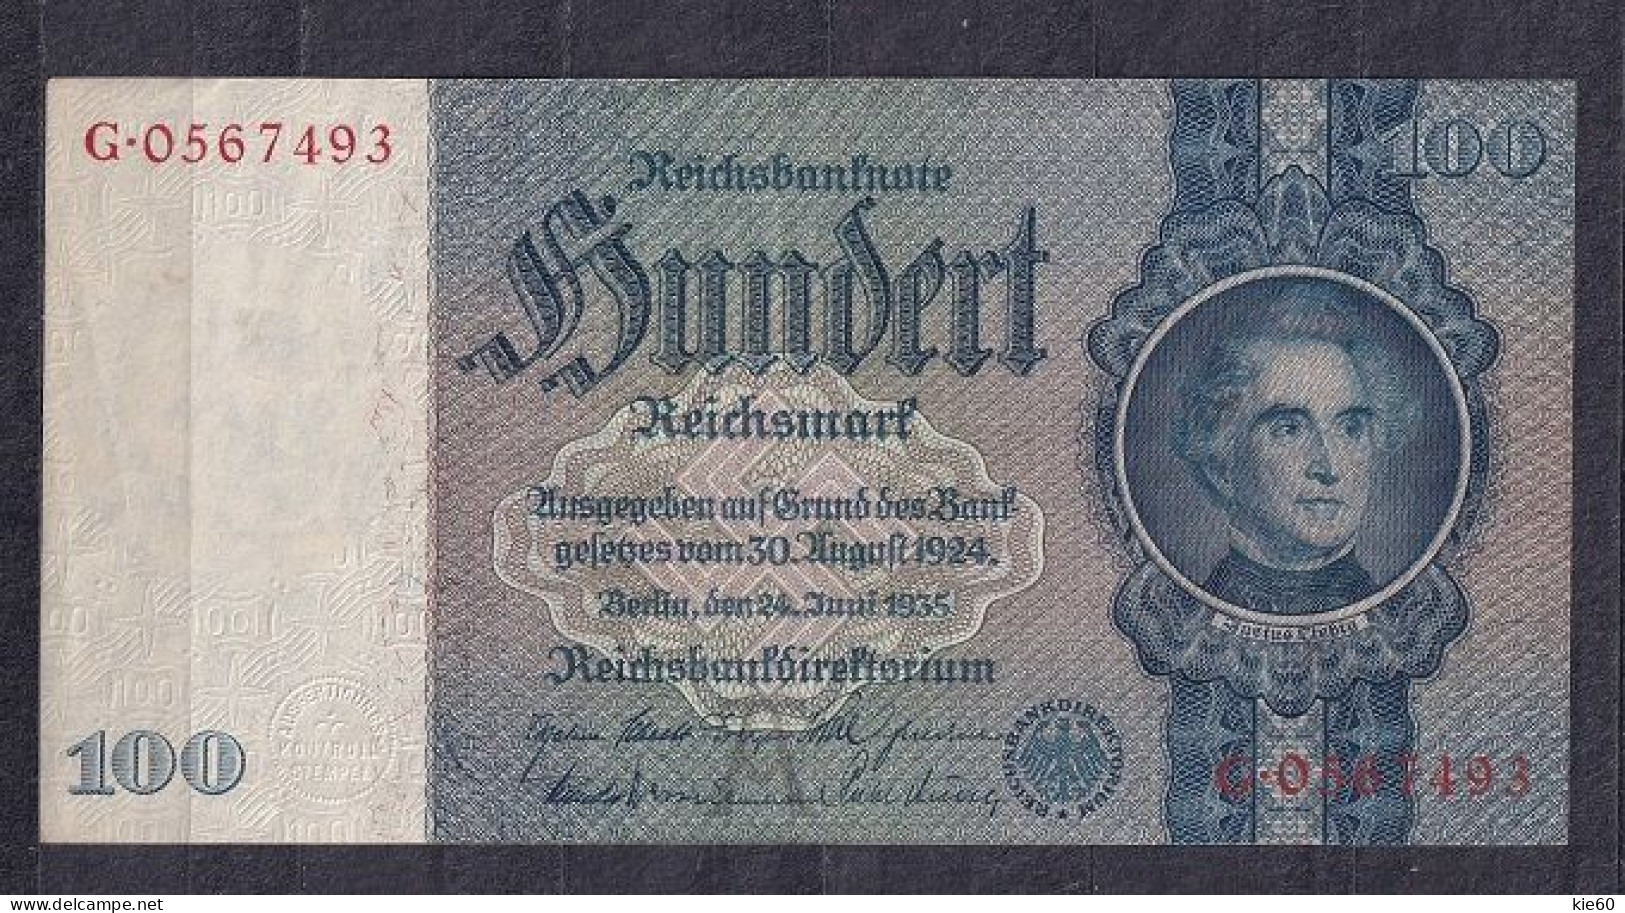 Germany - 1935 - 100 Mark   A/G  -    P183a1 - 50 Reichsmark